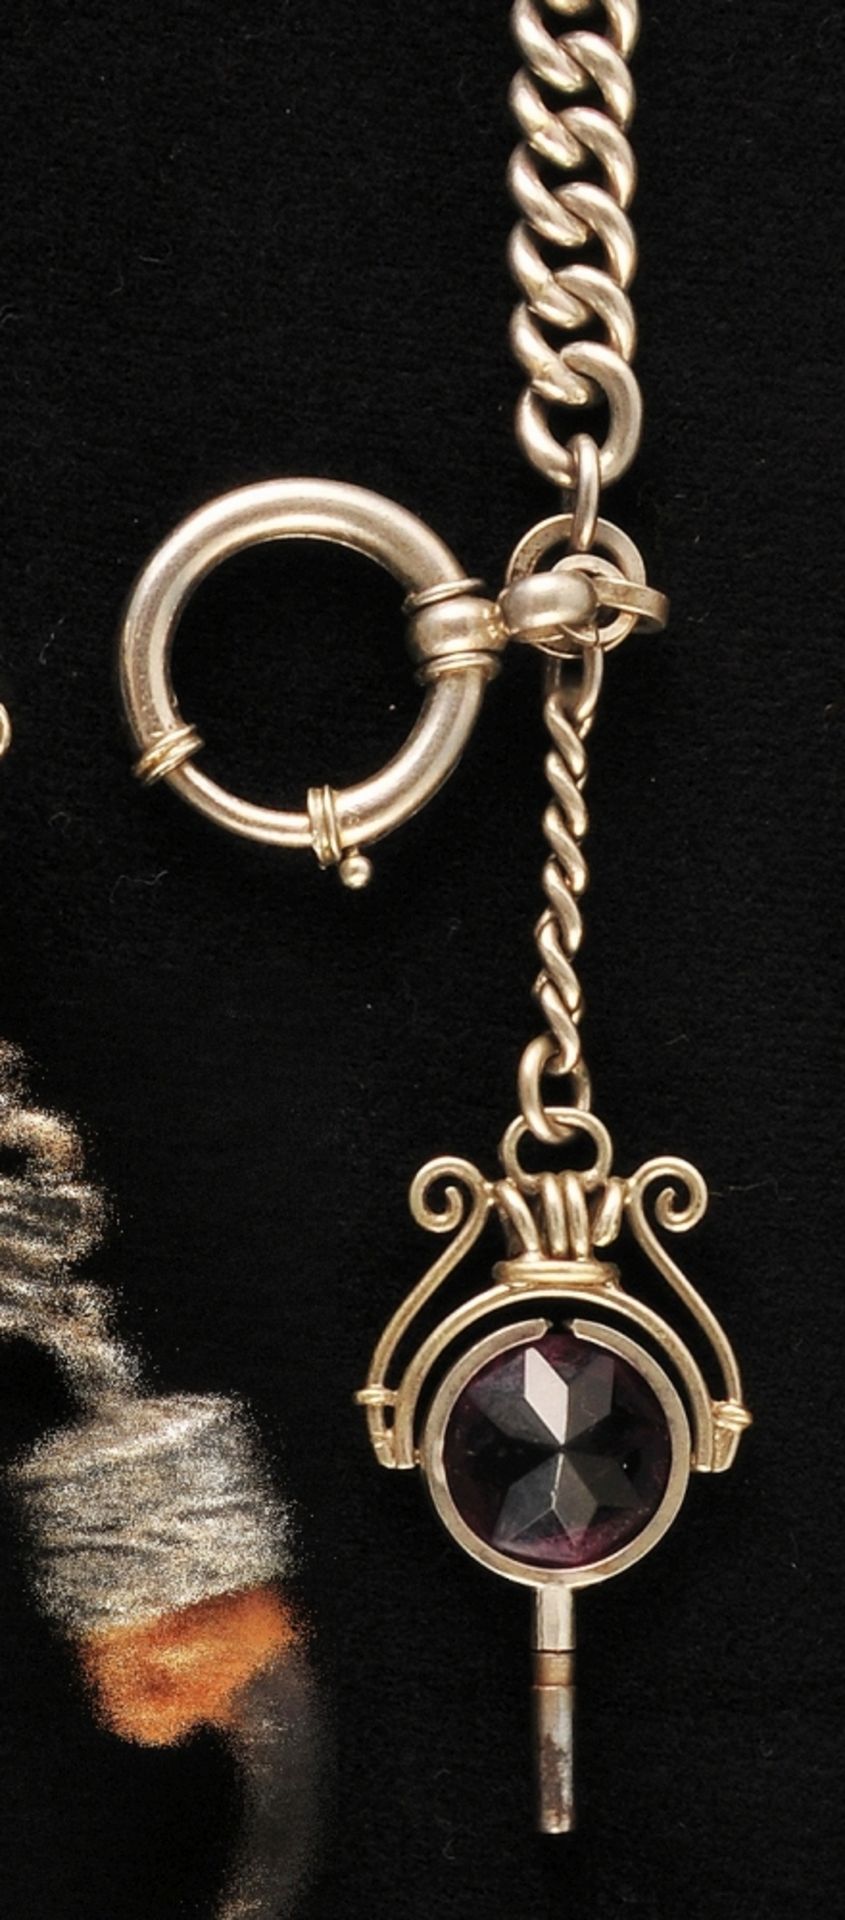 Silver pocket watch chain, armor links, gradient, with pocket watch key with amethyst